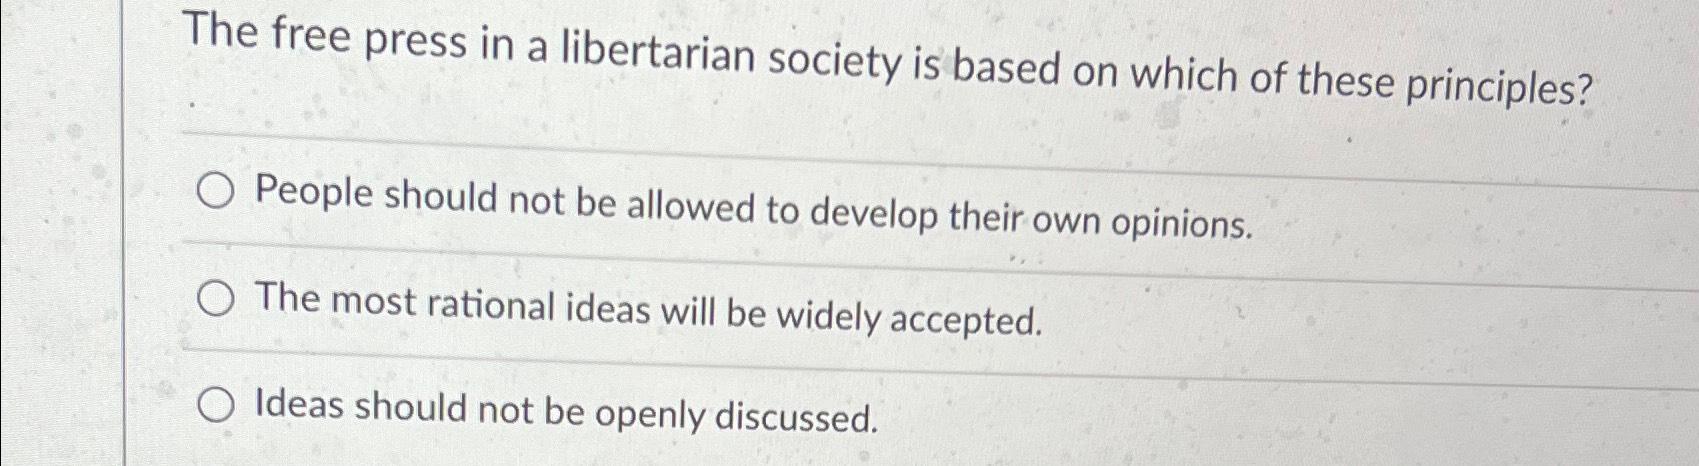 The free press in a libertarian society is based on which of these principles? O People should not be allowed